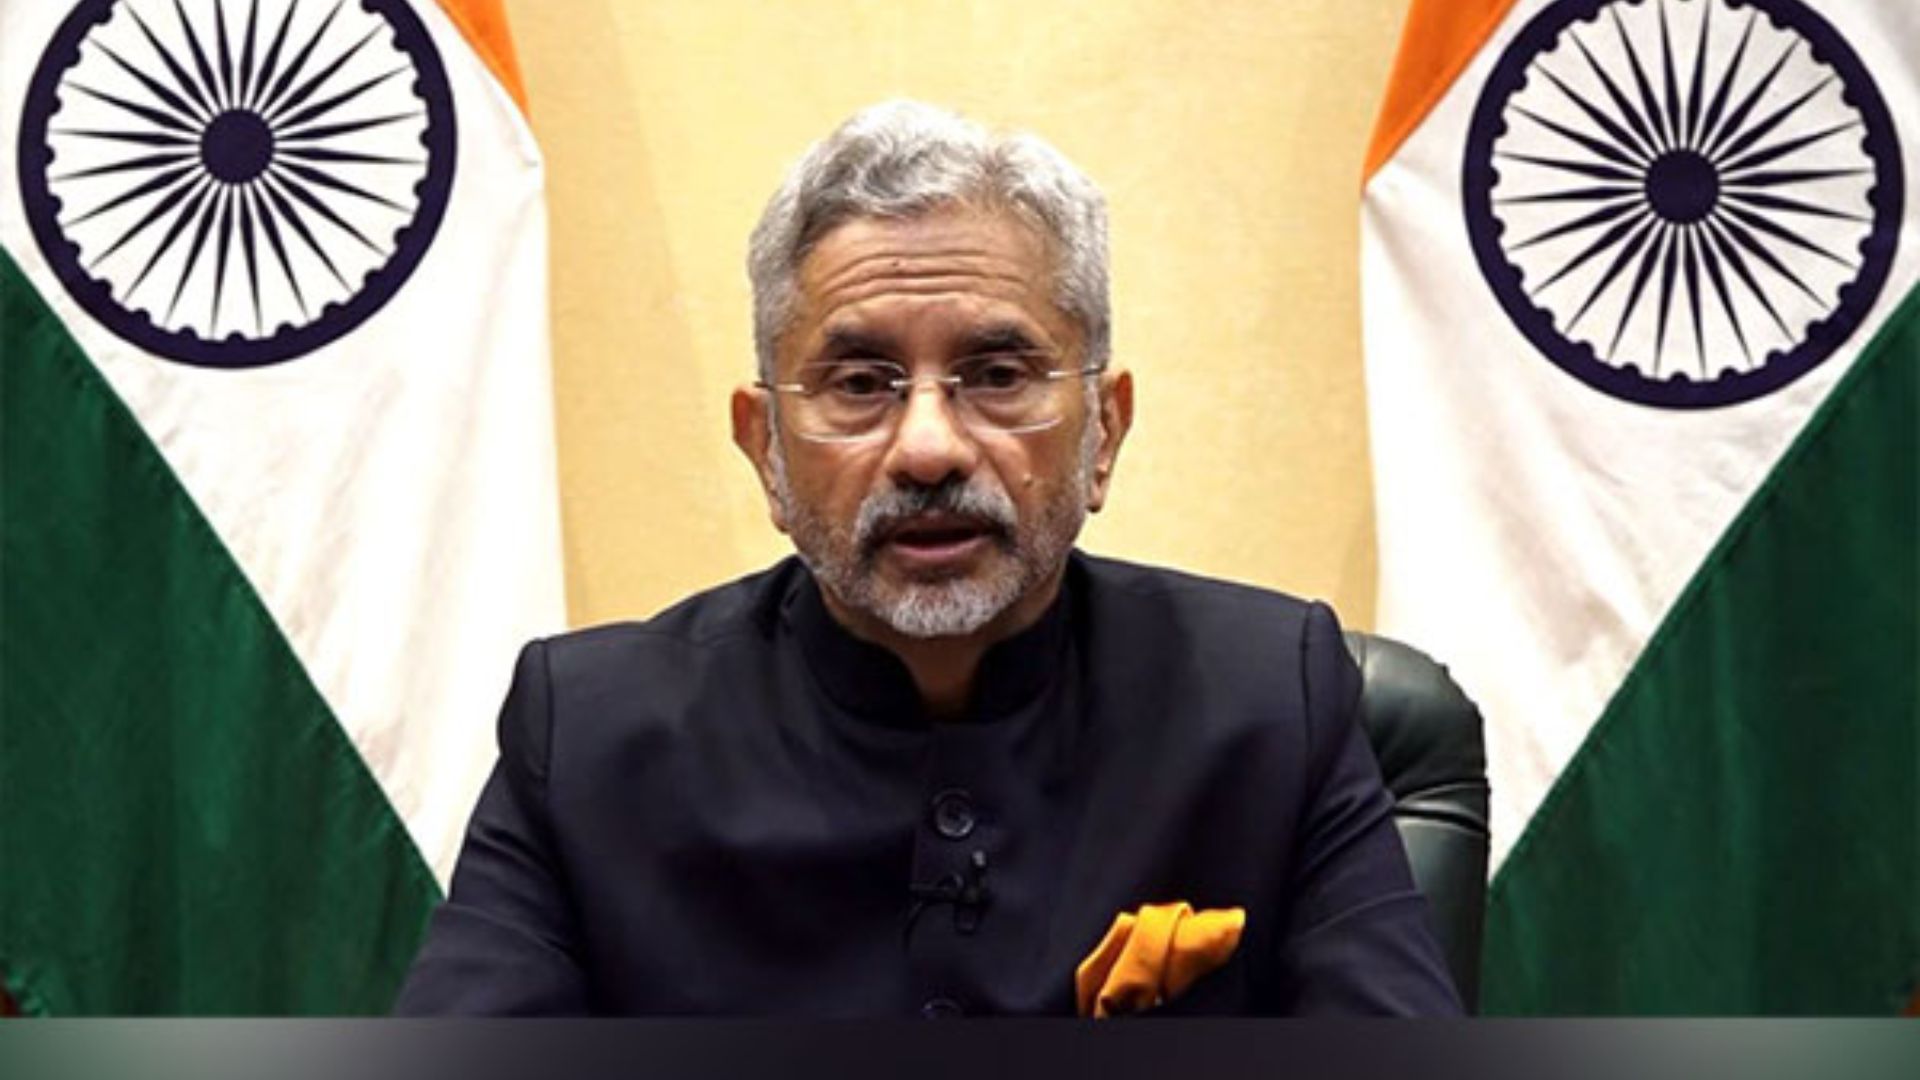 India completes same number of cashless transactions in a month as US does in three years, according to EAM Jaishankar